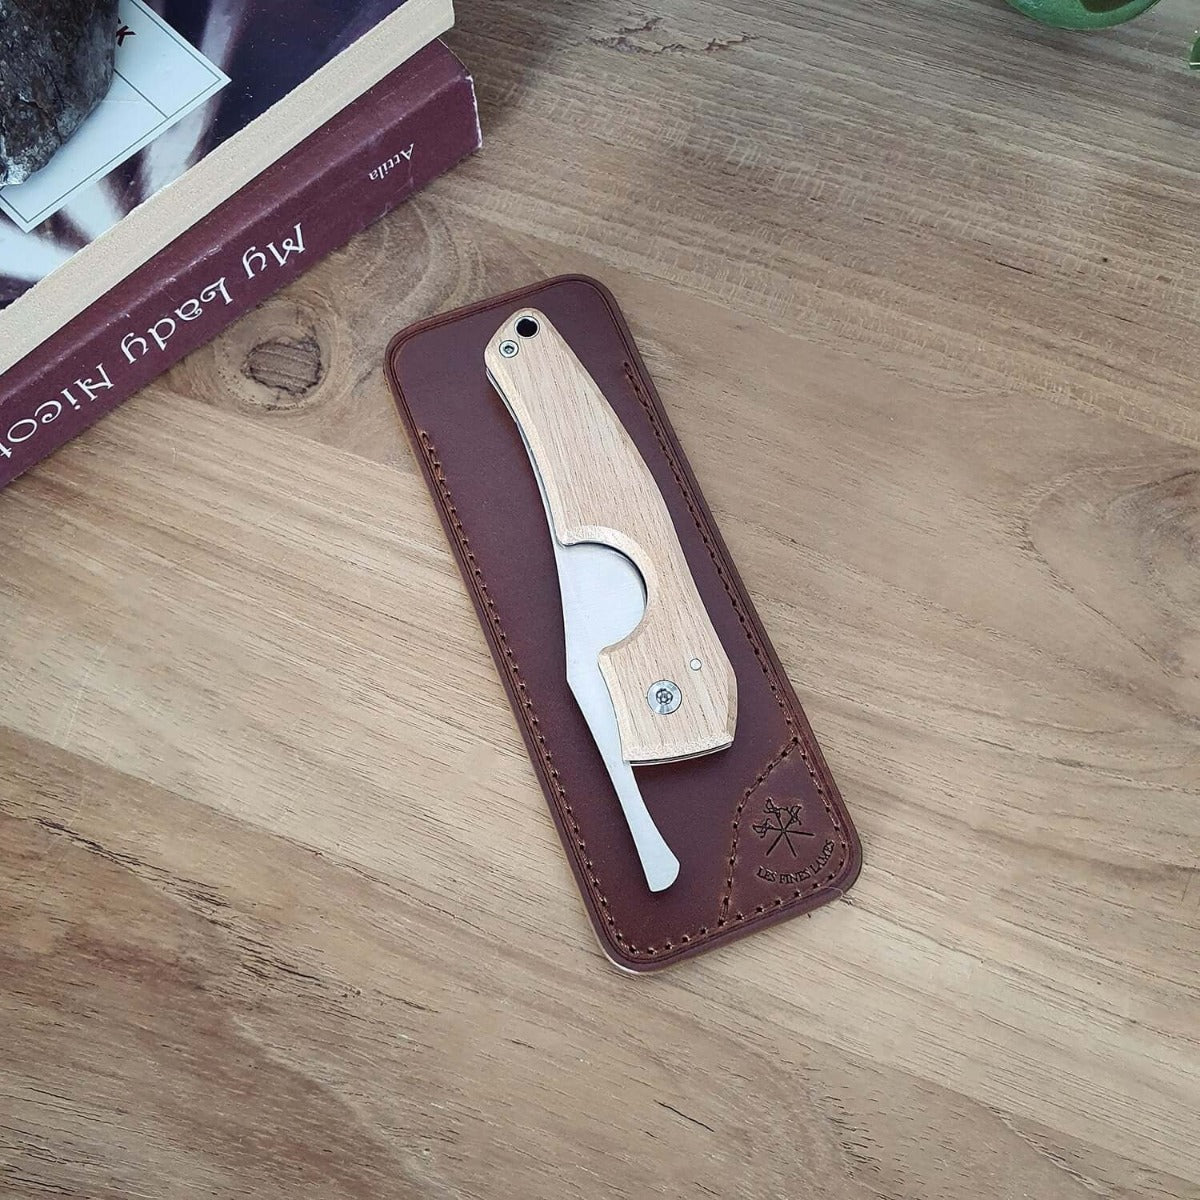 A Cigar Knife Tan Leather Case with a wooden handle in a leather sheath from KirbyAllison.com.